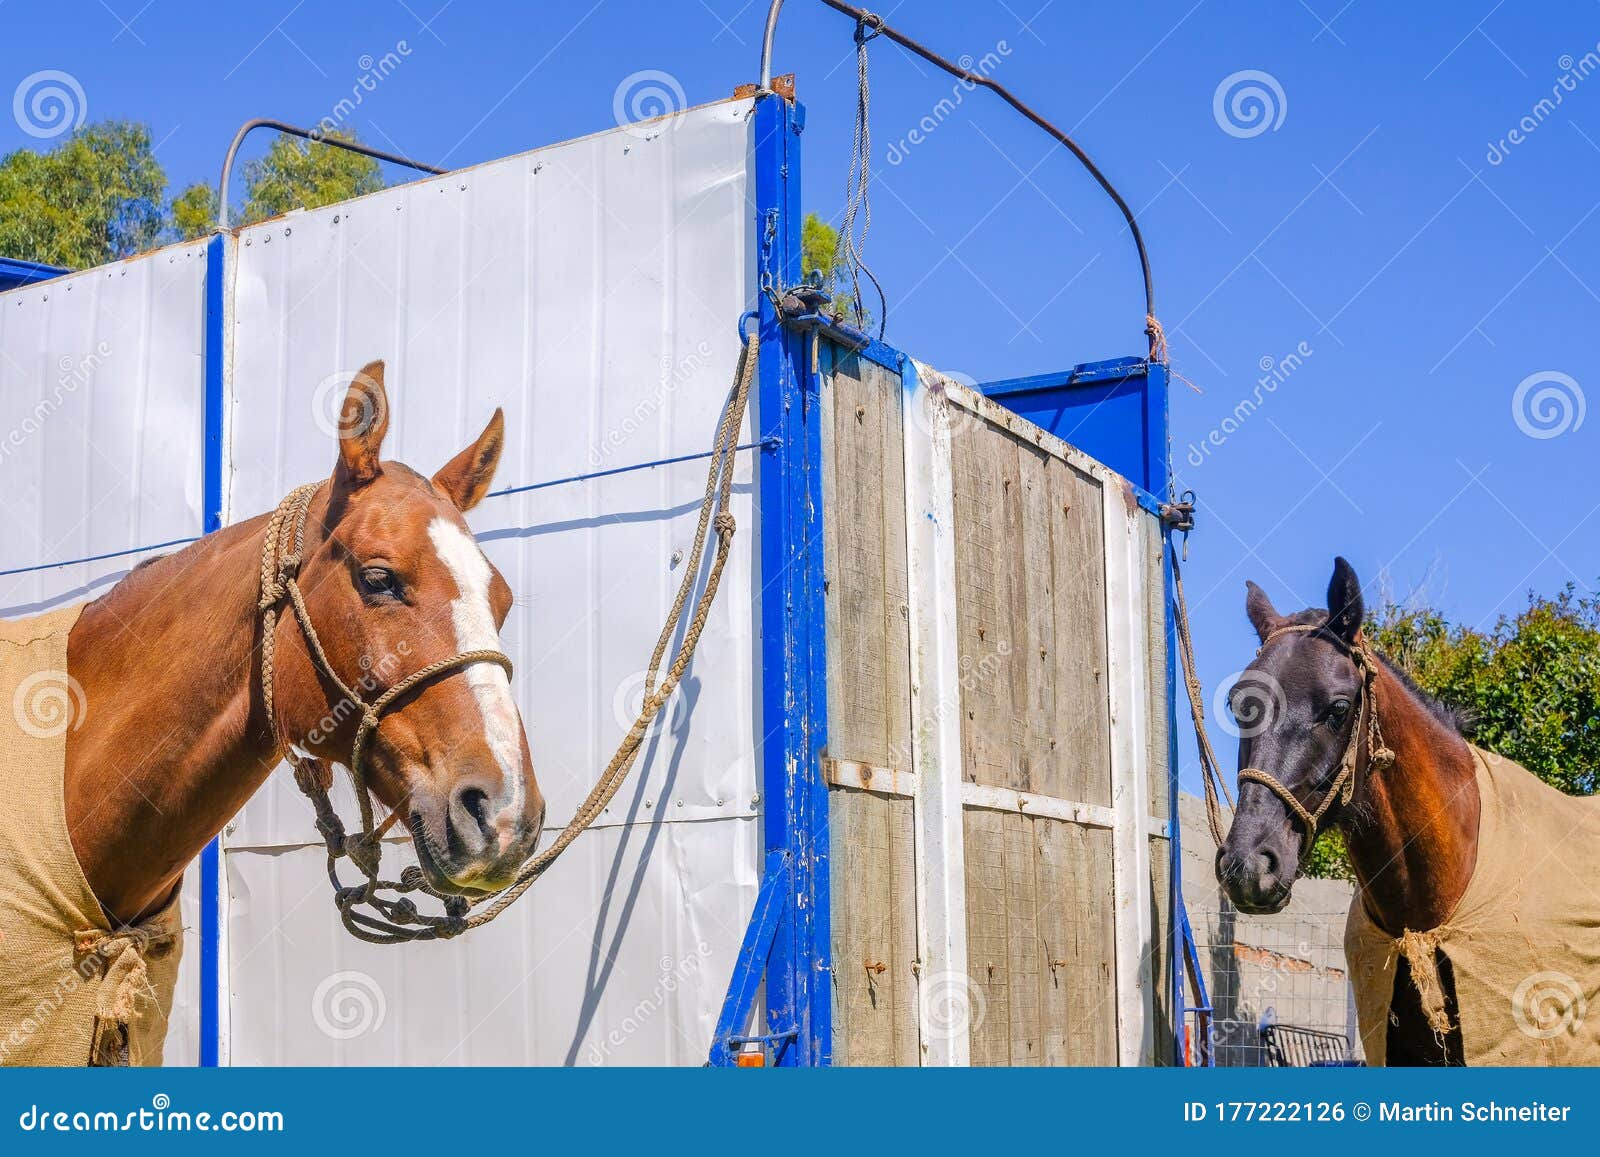 horses at a criolla festival in caminos, canelones, uruguay, south america